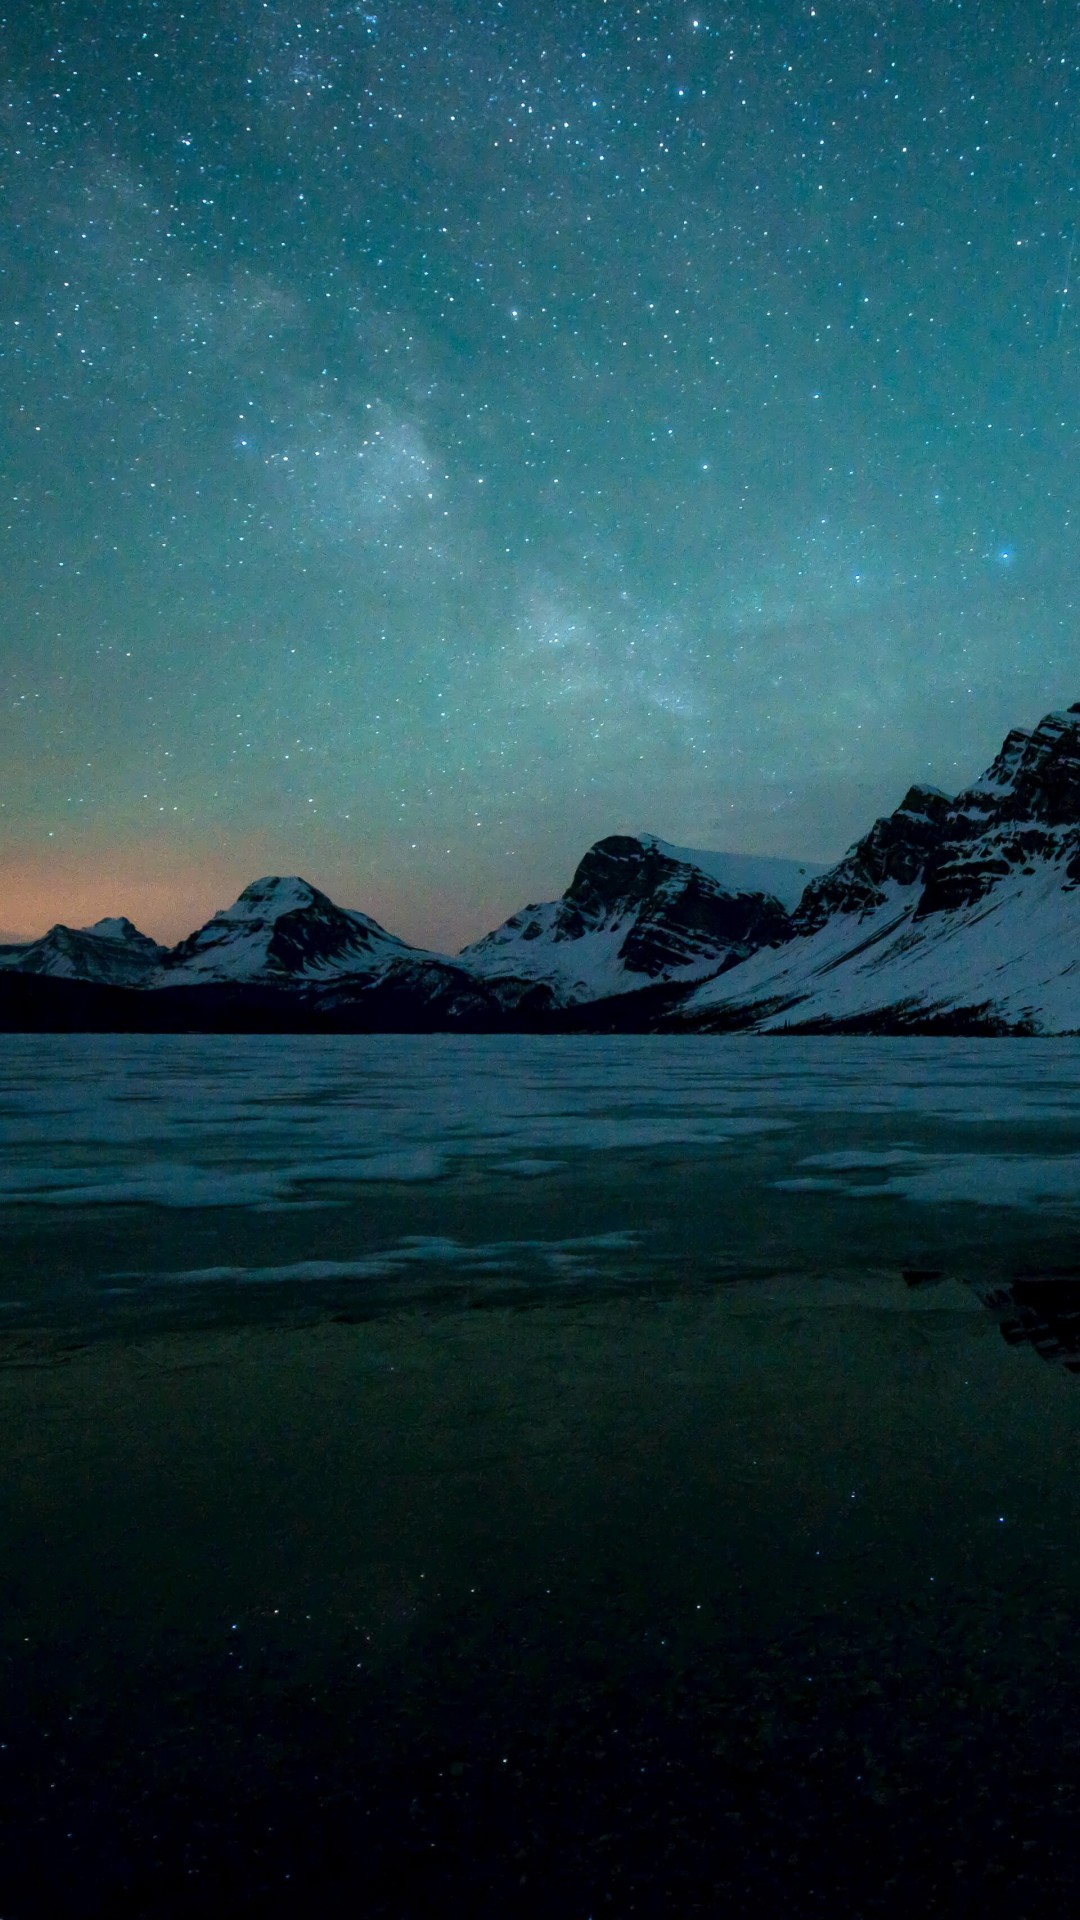 Milky Way over Bow Lake, Alberta, Canada Wallpaper for HTC One